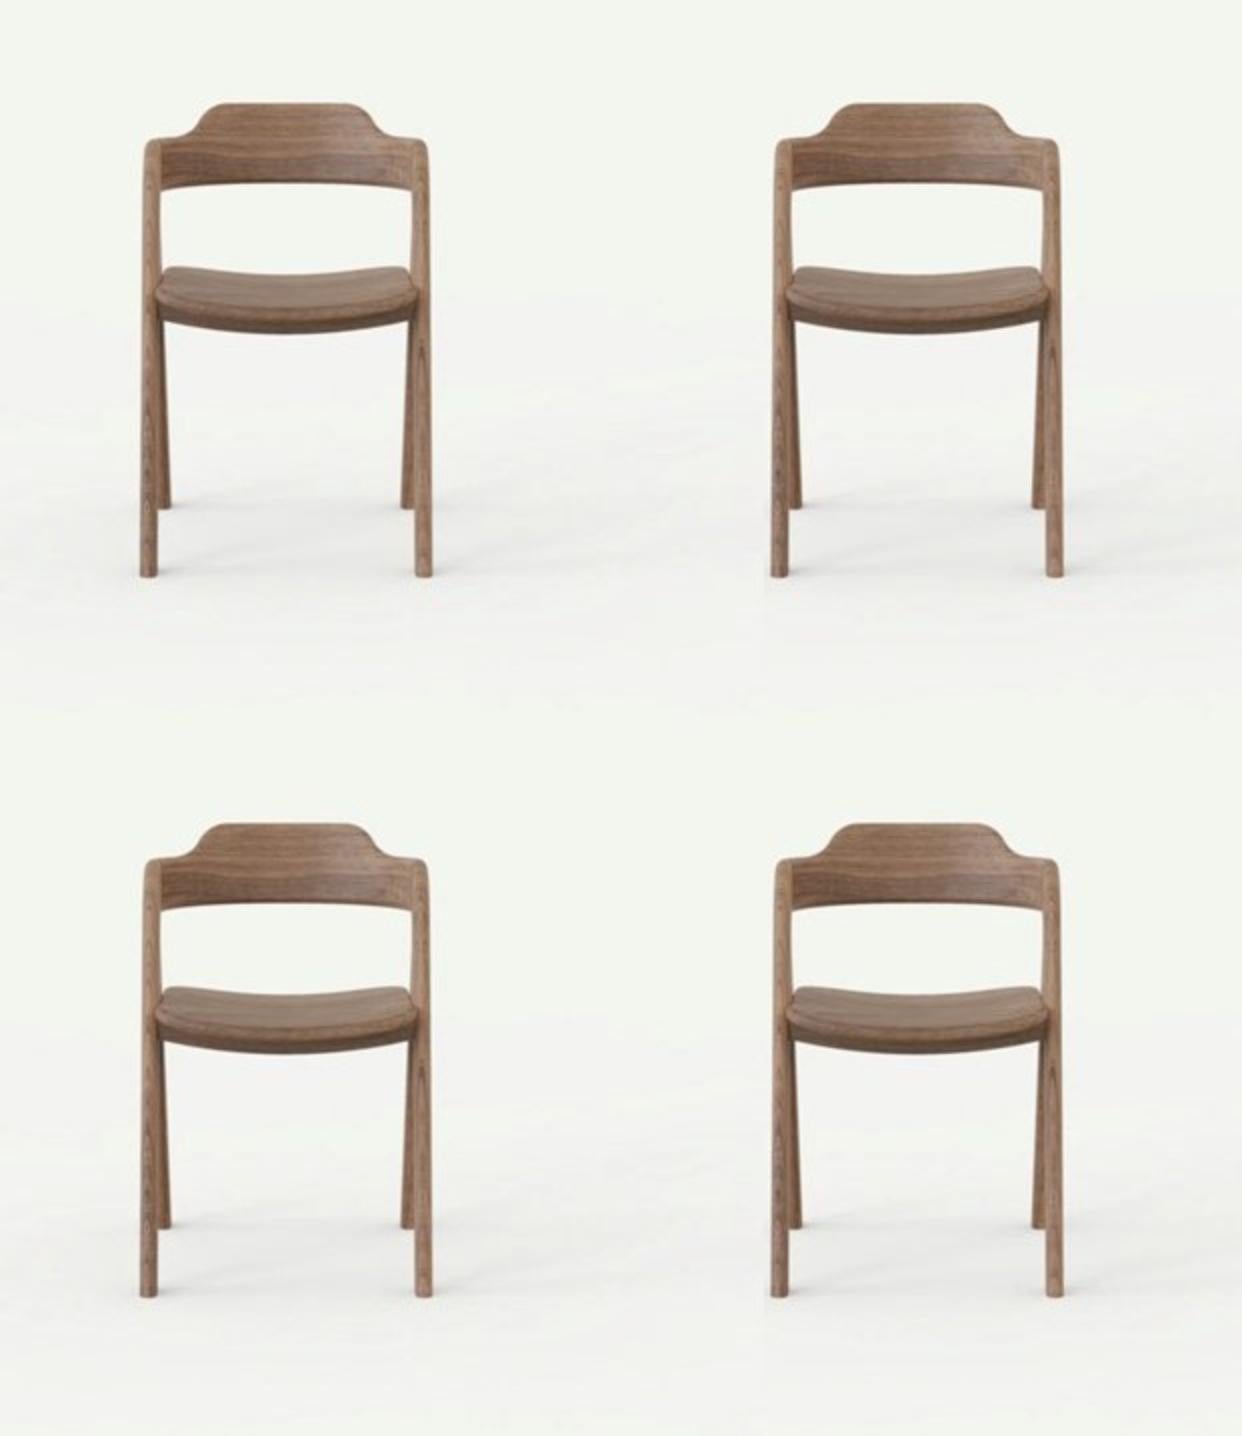 Set of 4 balance chairs by Sebastián Angeles
Material: Walnut
Dimensions: W 40 x D 40 x 100 cm
Also available: Other colors available

The love of processes, the properties of materials, details and concepts make Dorica Taller a study not only